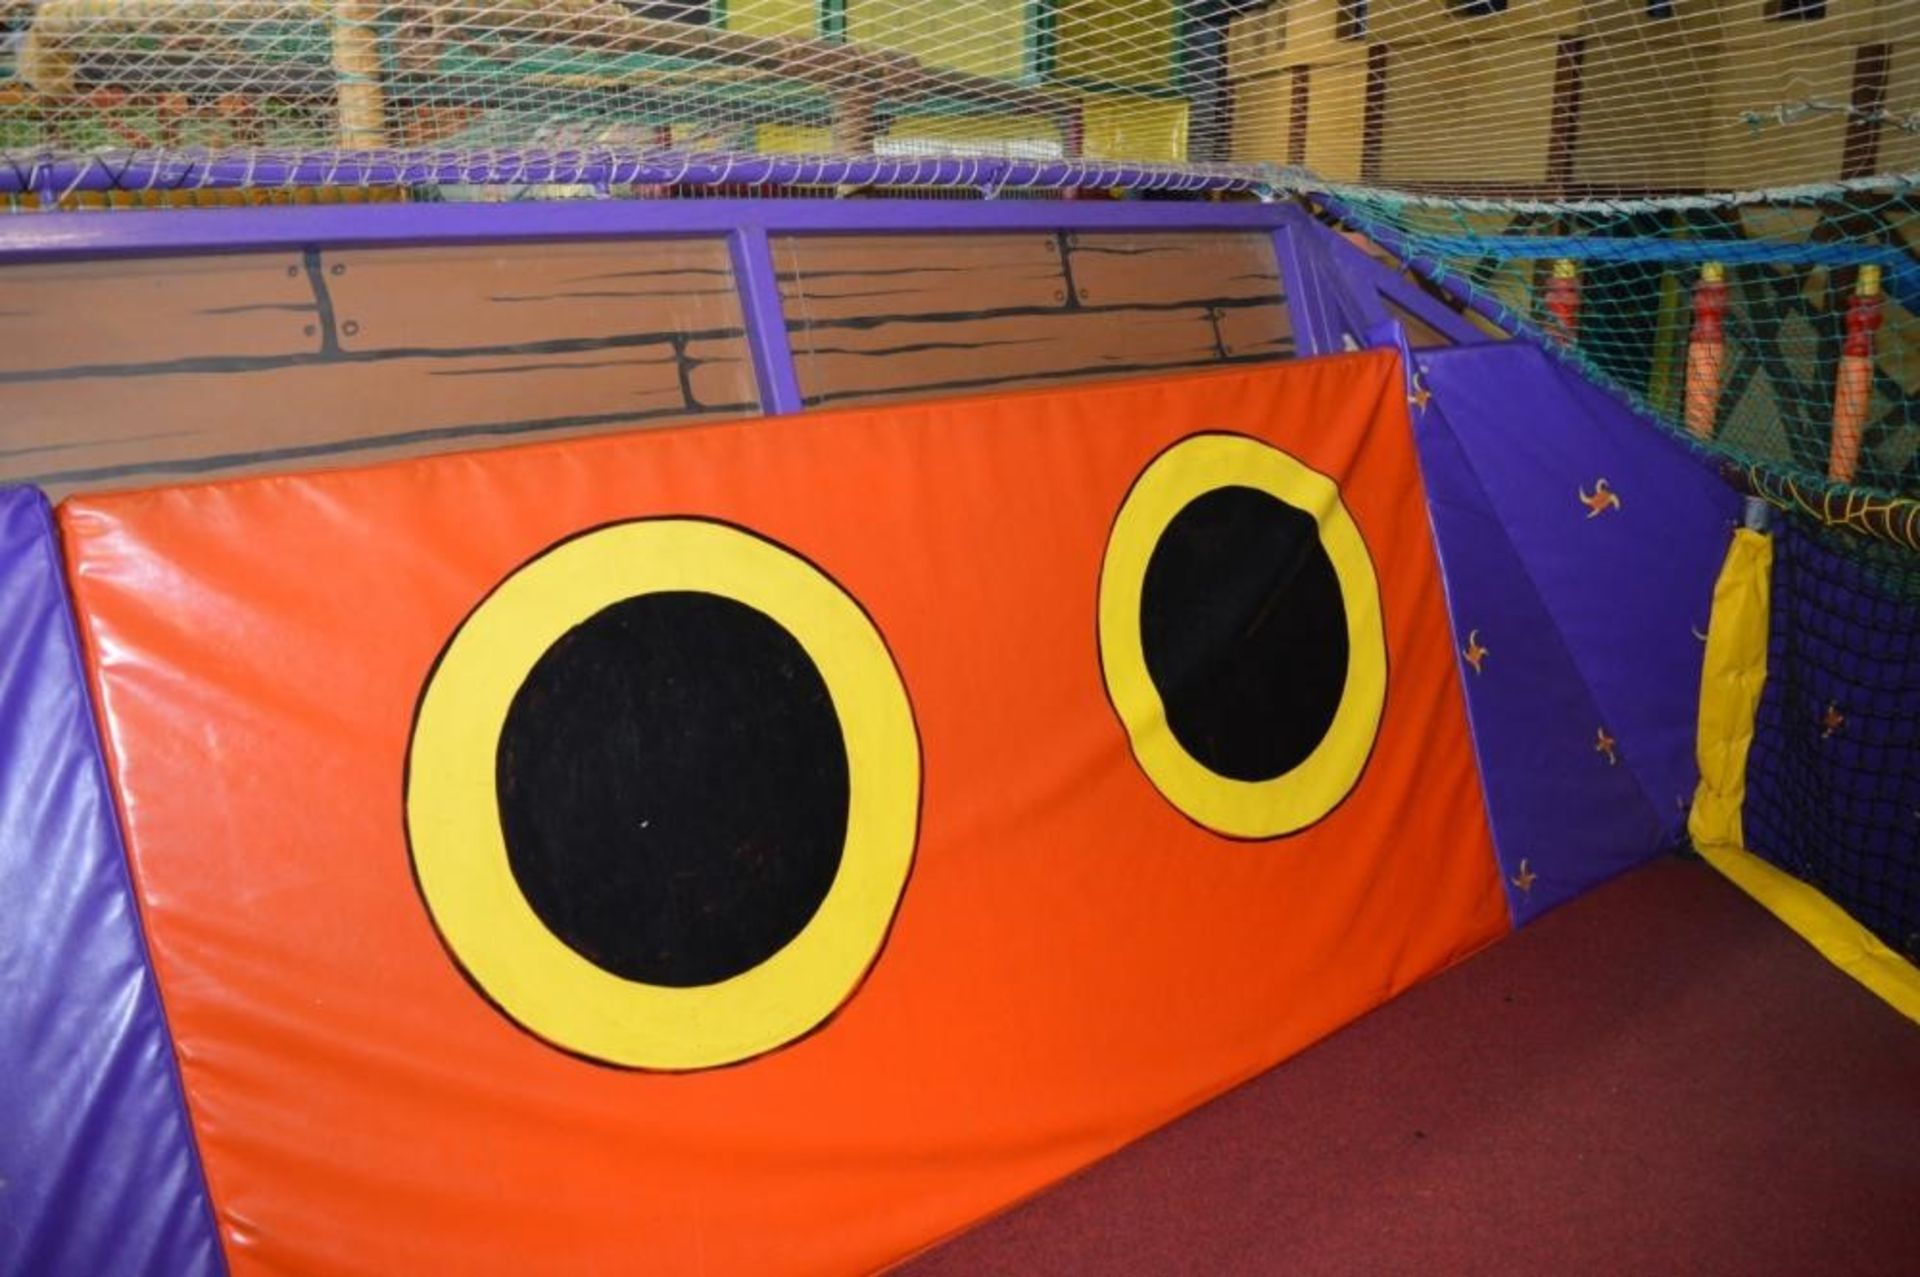 Botany Bay Puddletown Pirates Play Centre - The Only Pirate Themed Play Centre in the North West - F - Image 6 of 30